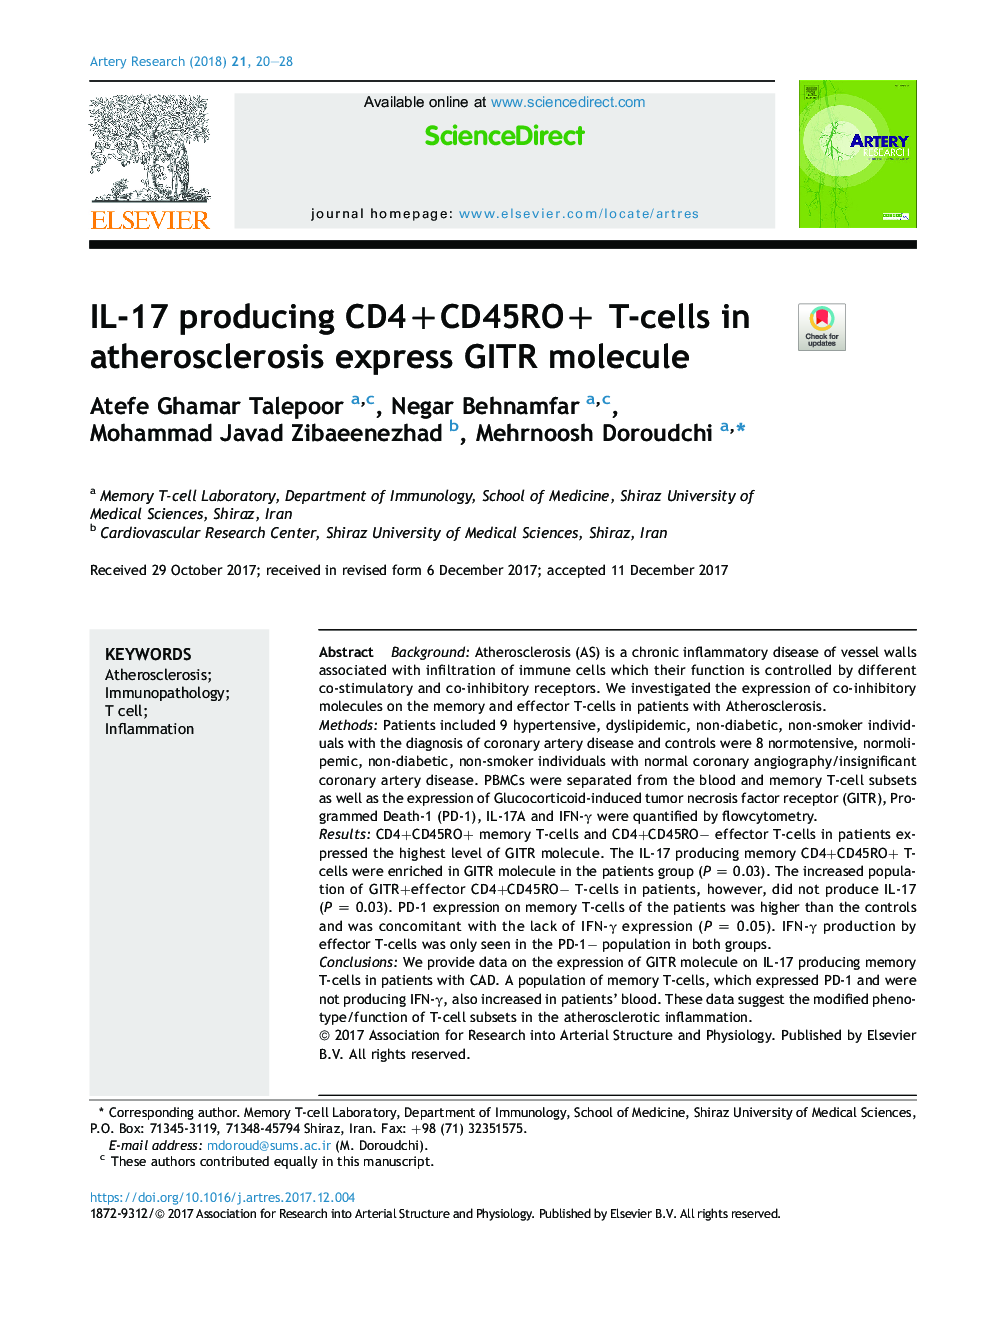 IL-17 producing CD4+CD45RO+ T-cells in atherosclerosis express GITR molecule